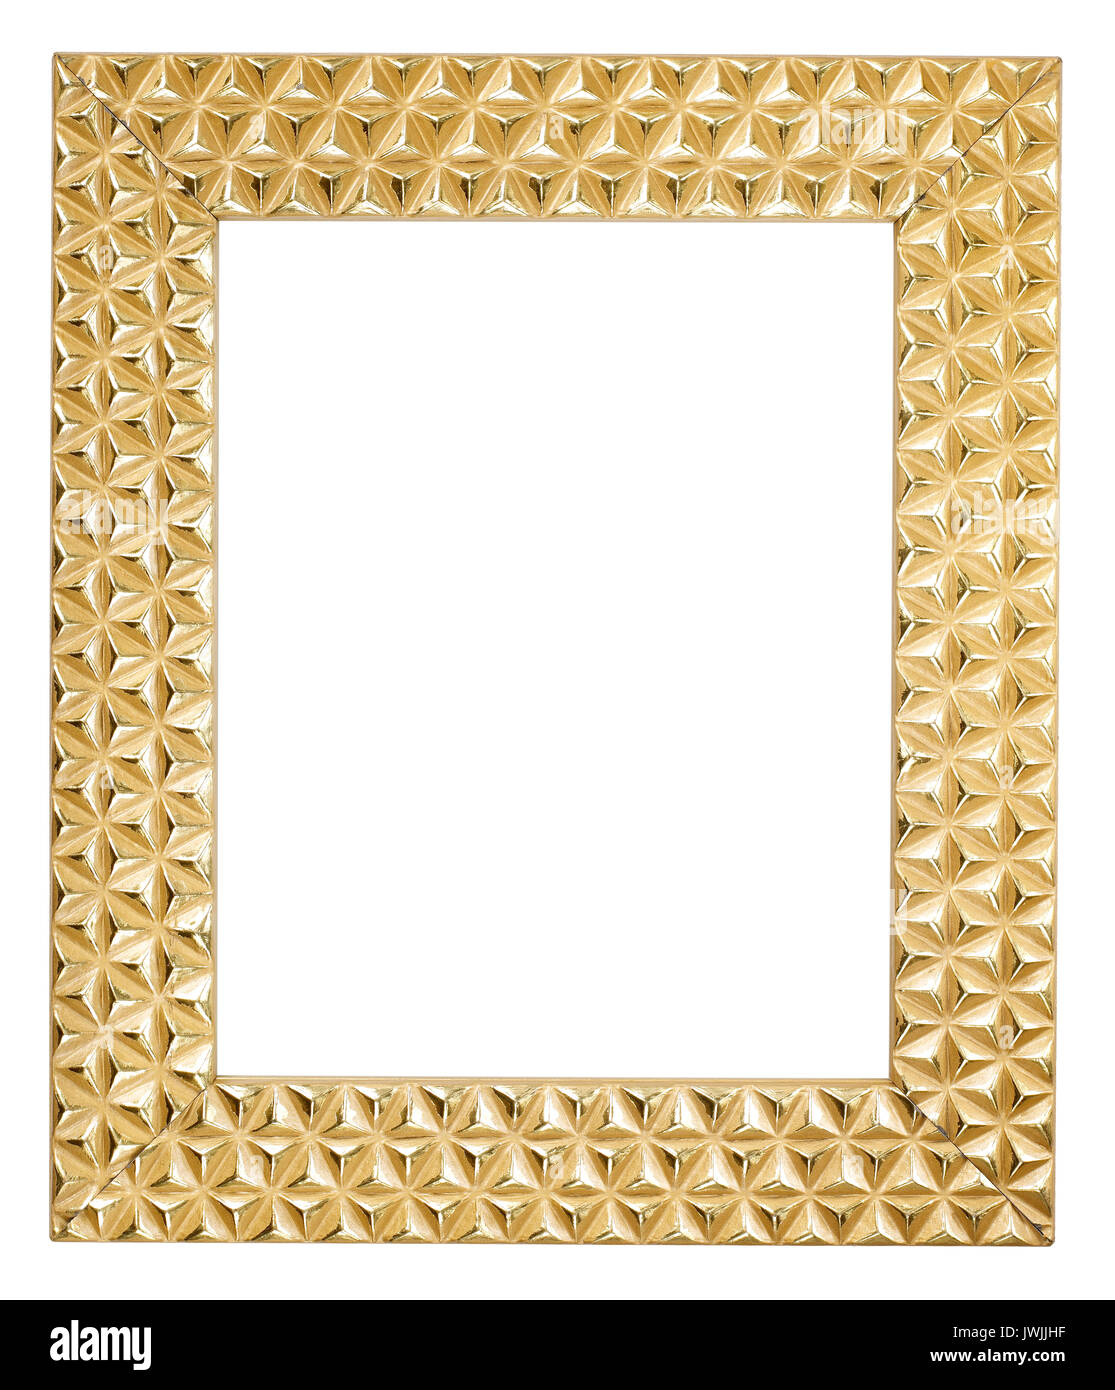 Gold painted Picture frame Stock Photo